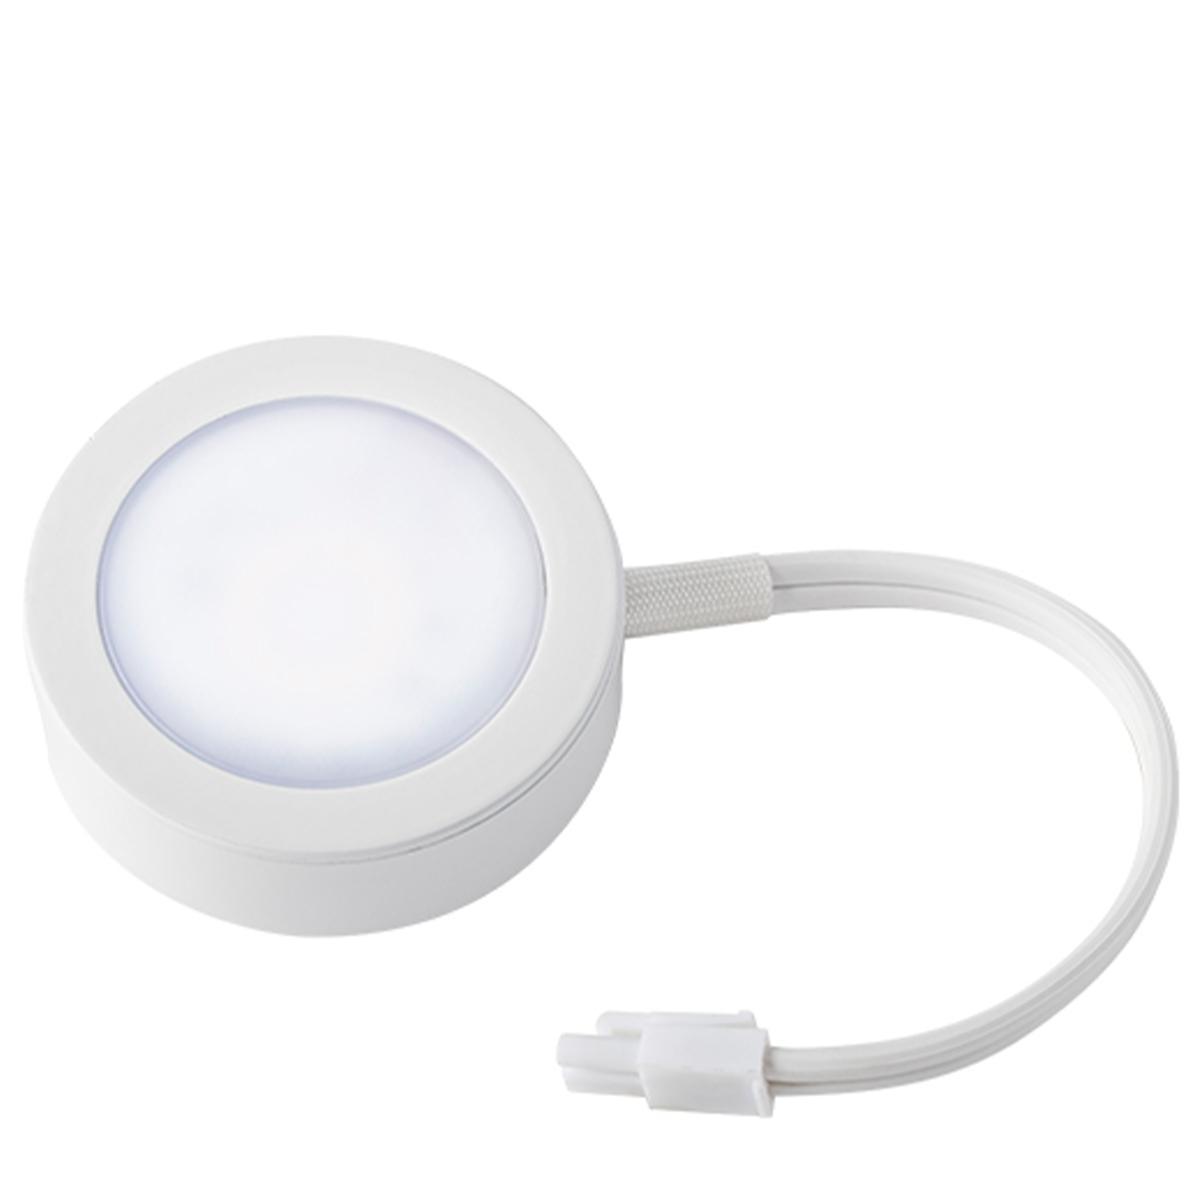 3-CCT LED Puck Light with Lead Wire, 3" Wide, 27K/30K/35K, 120V - Bees Lighting